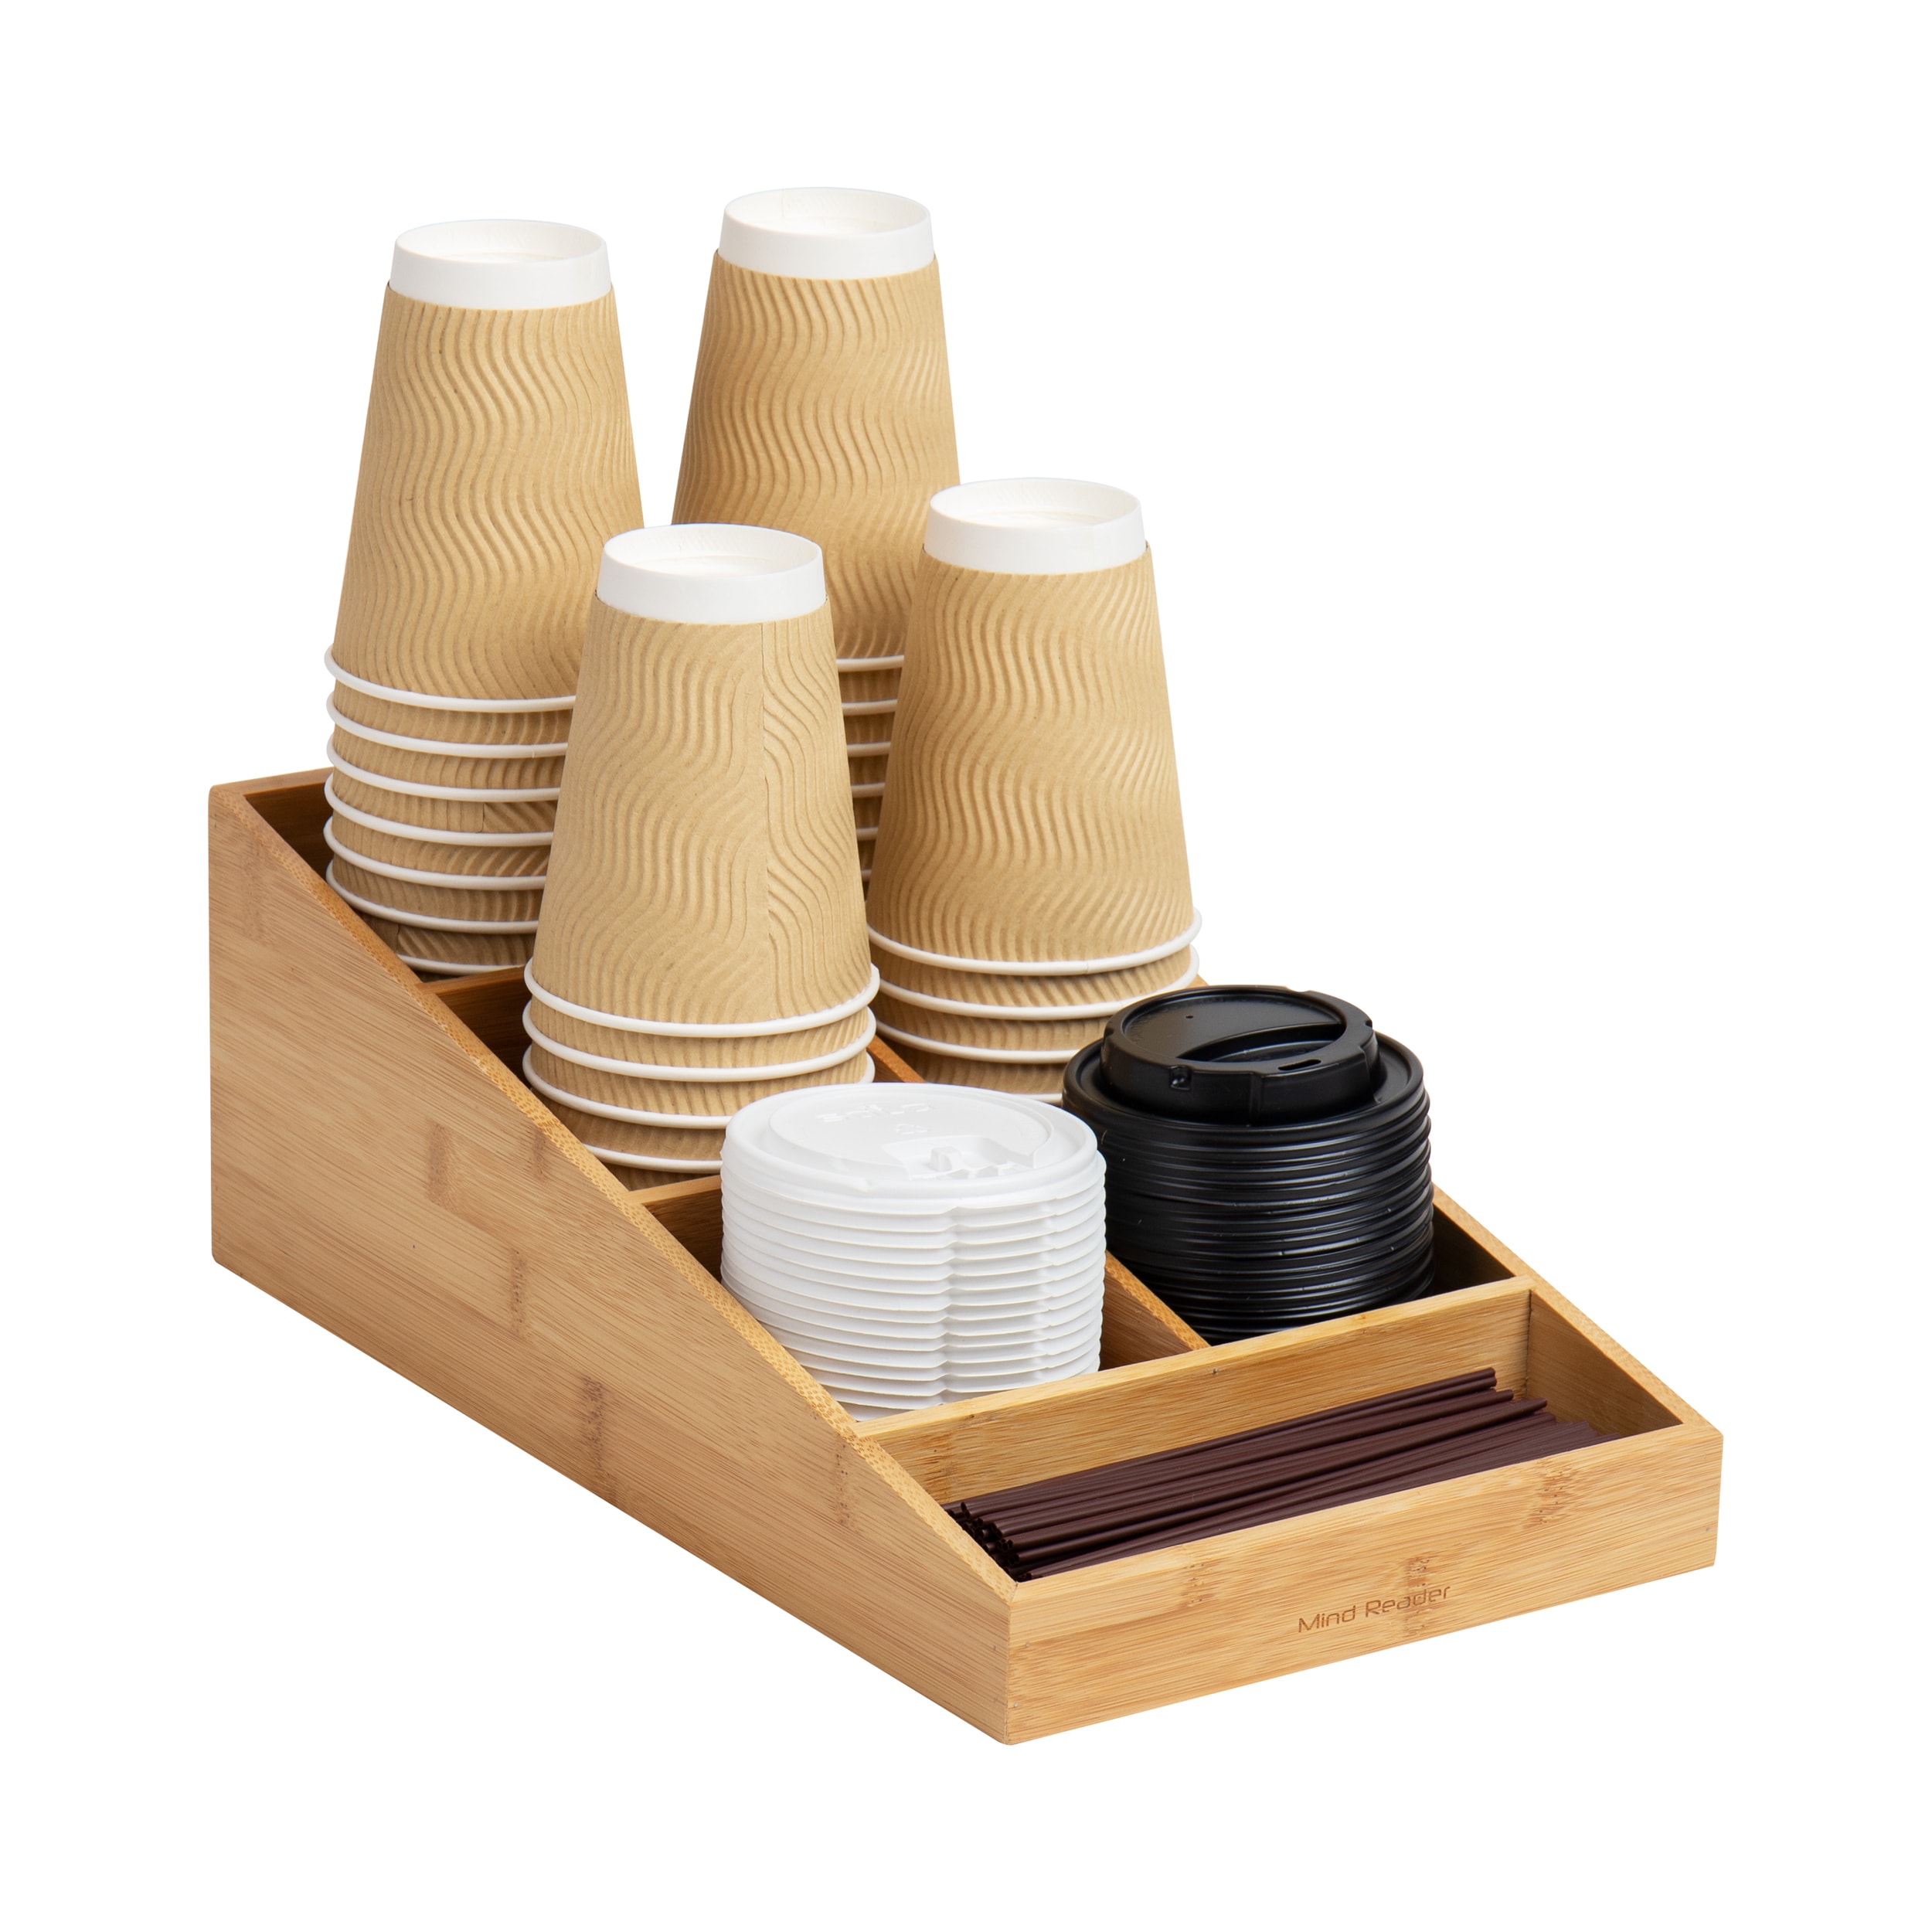 Mind Reader 6-section Coffee Condiment Organizer, Utensil And Cup